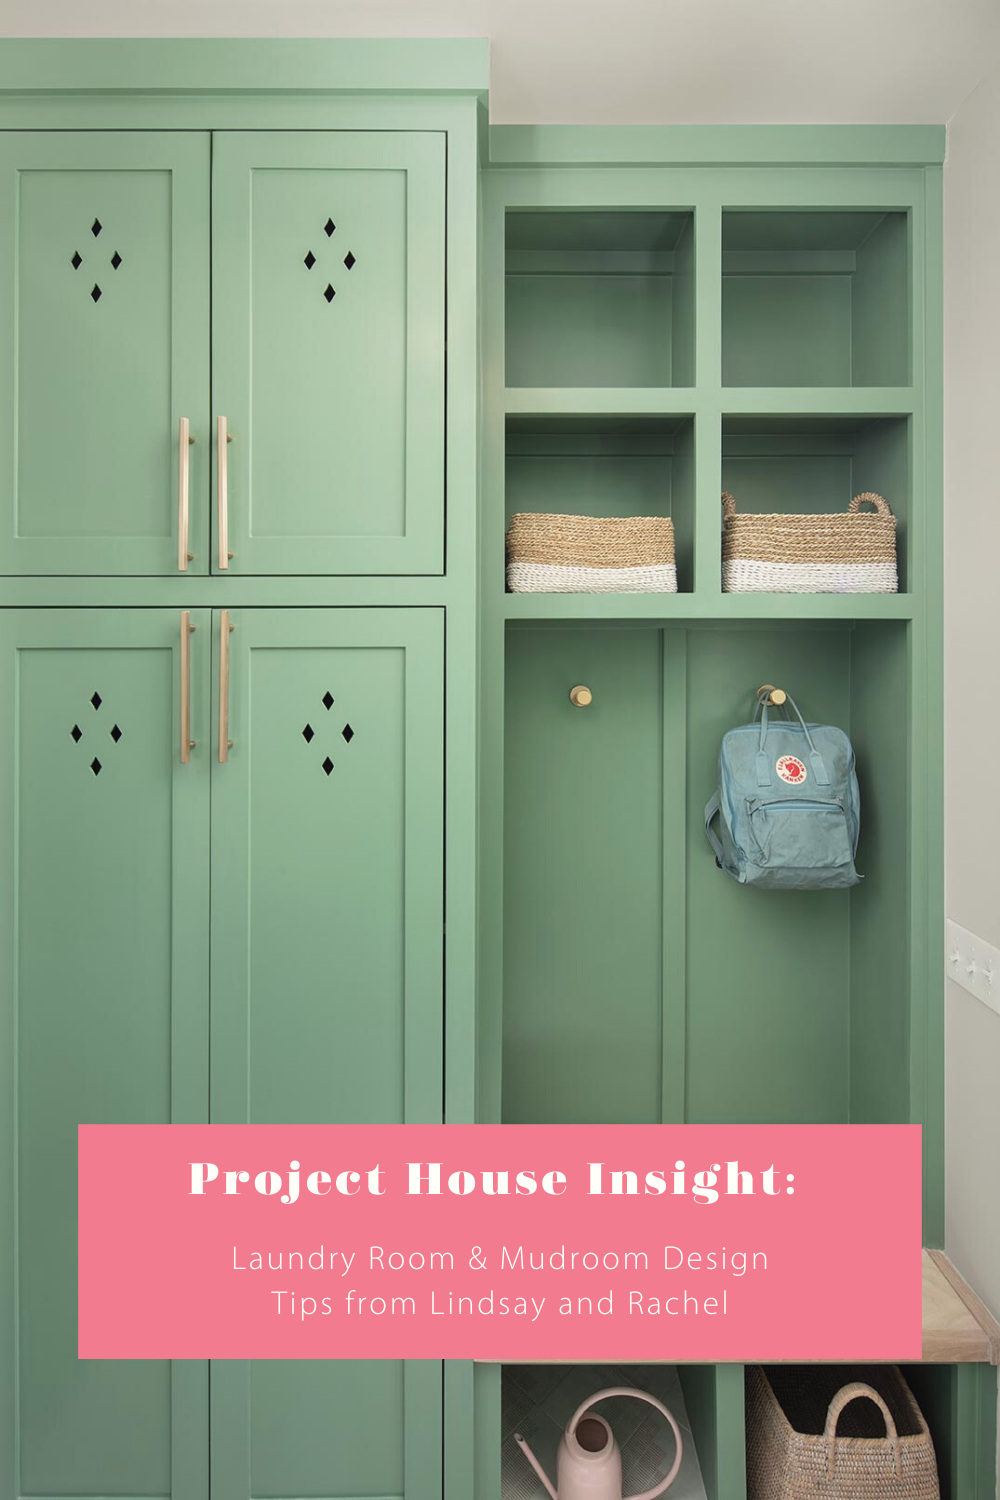 laundry and mudroom designed by Rachel Shingleton. Soft green cabinets are complimented by brass hardware